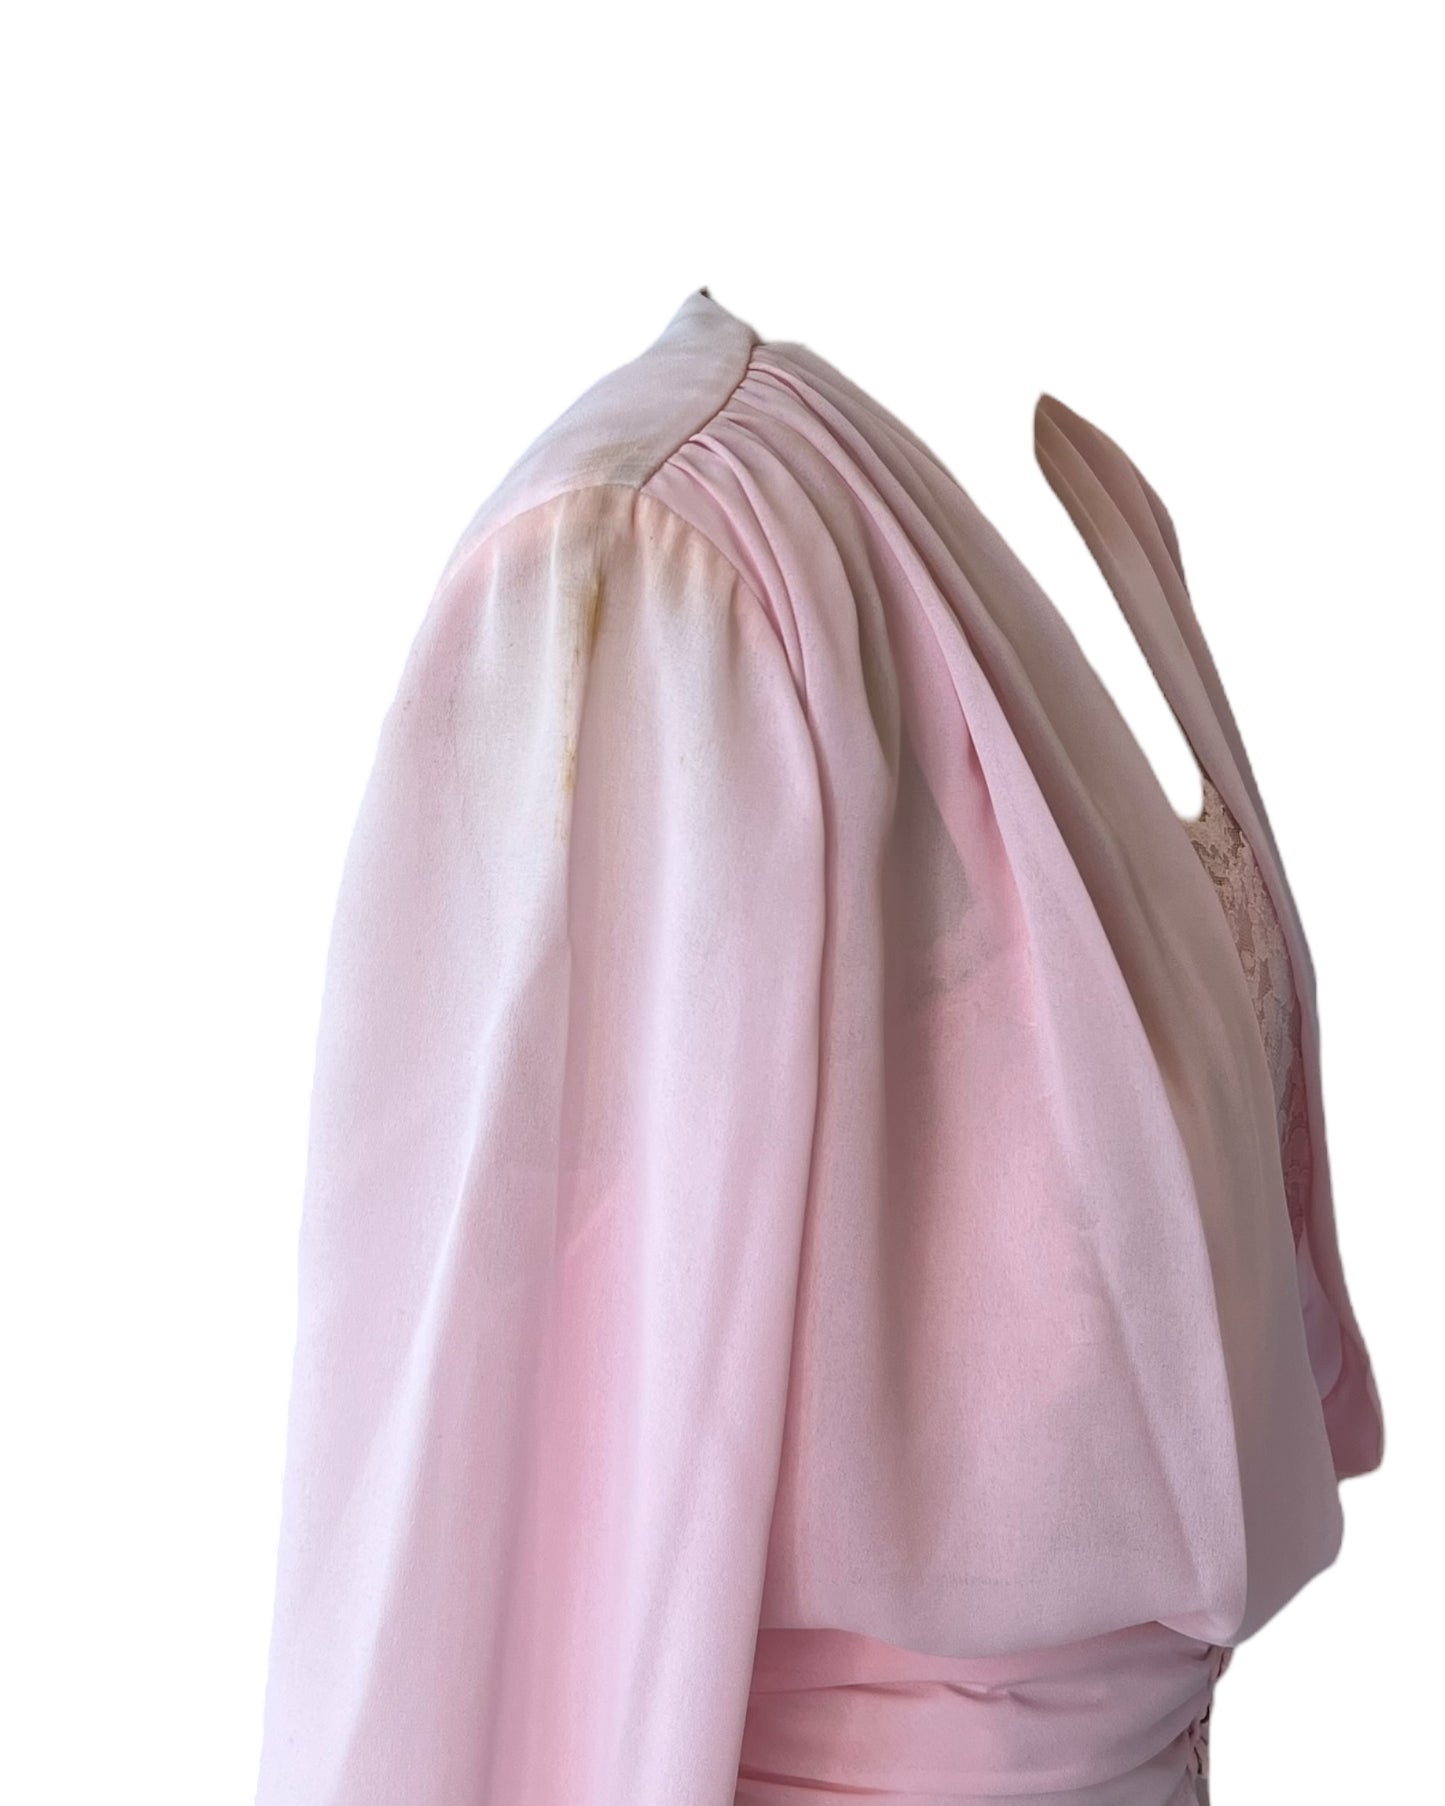 1960s Pretty Pink Party Dress